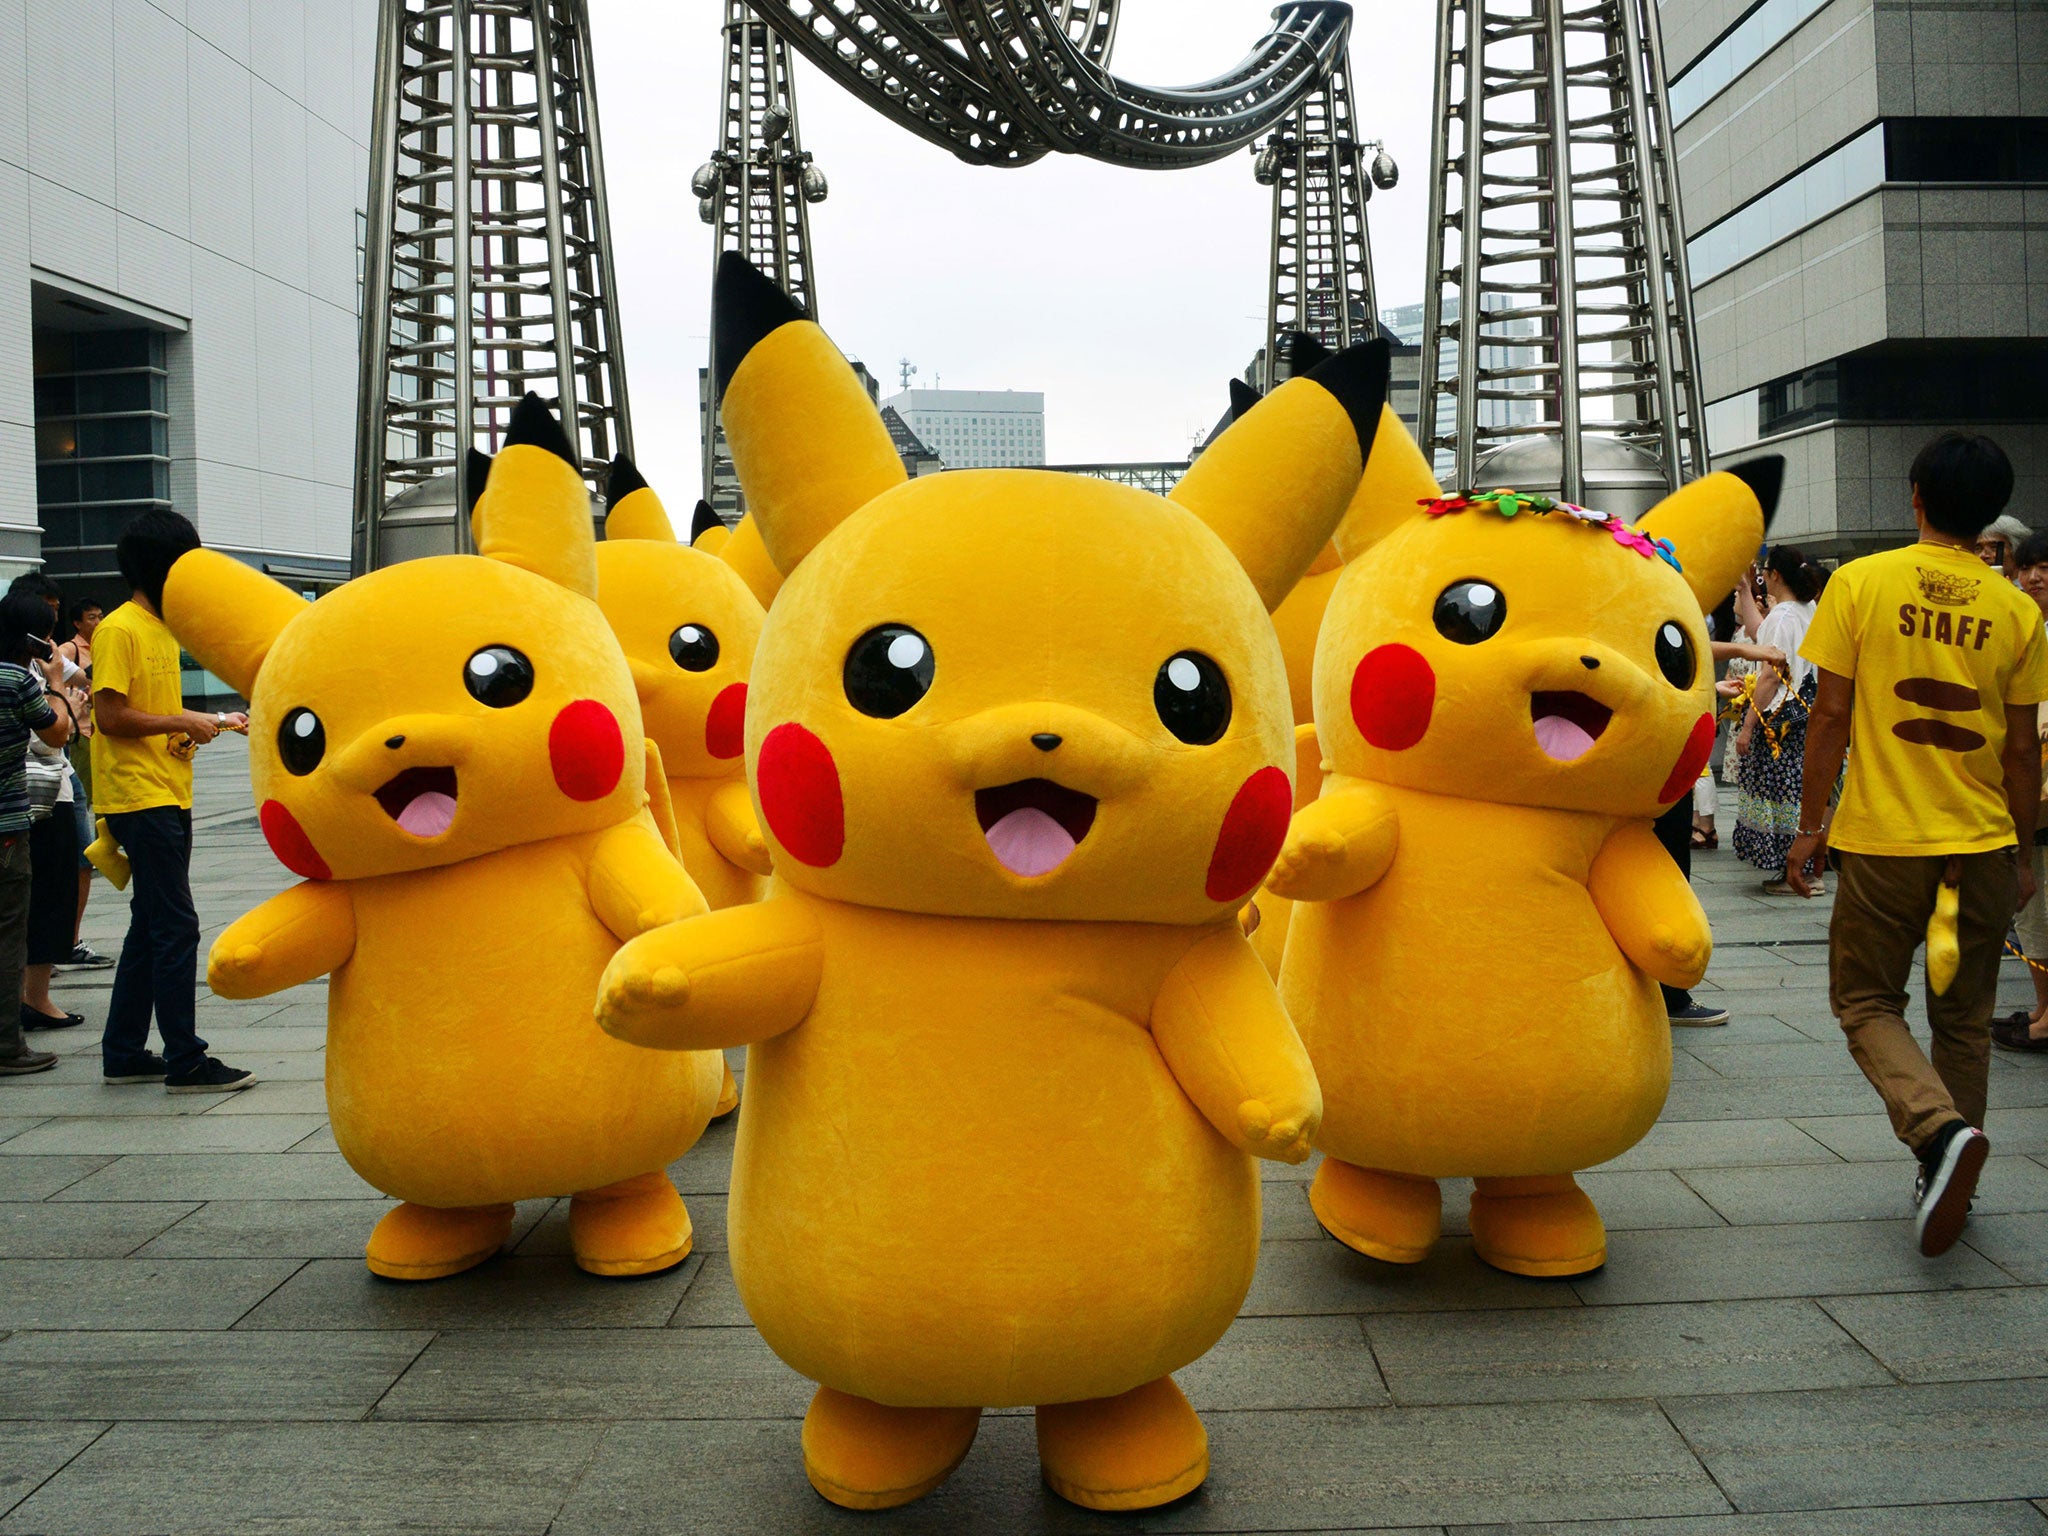 Dozens of Pikachu characters parade at the Landmark Plaza shopping mall Tokyo on 14 August, 2014